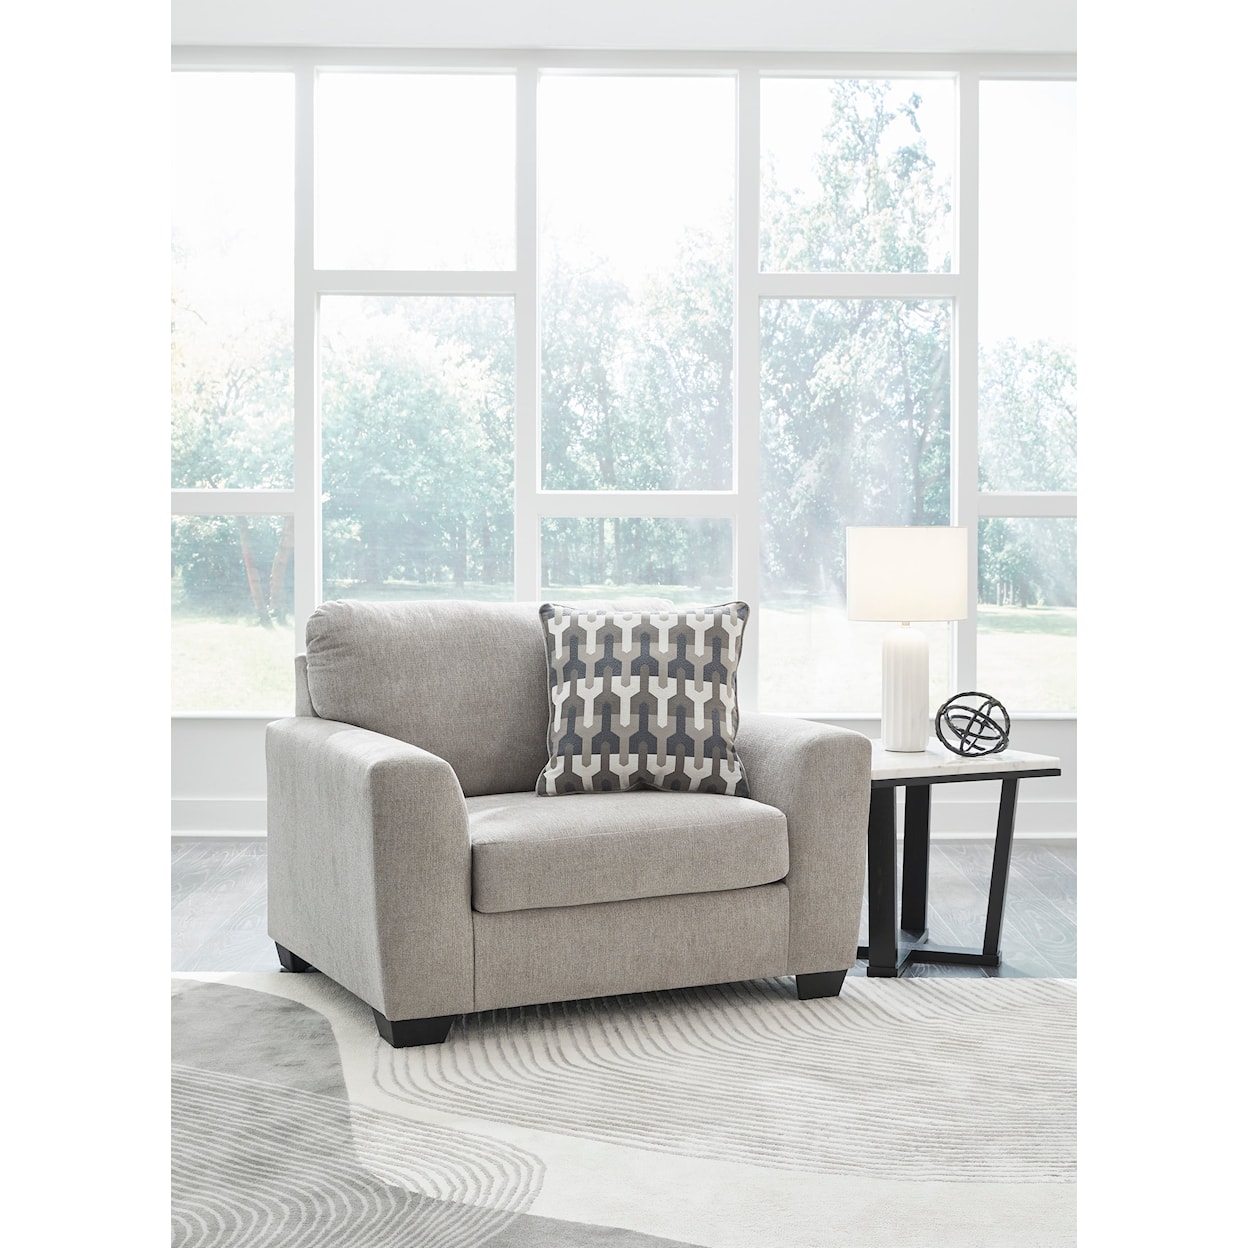 Signature Design Avenal Park Oversized Chair and Ottoman